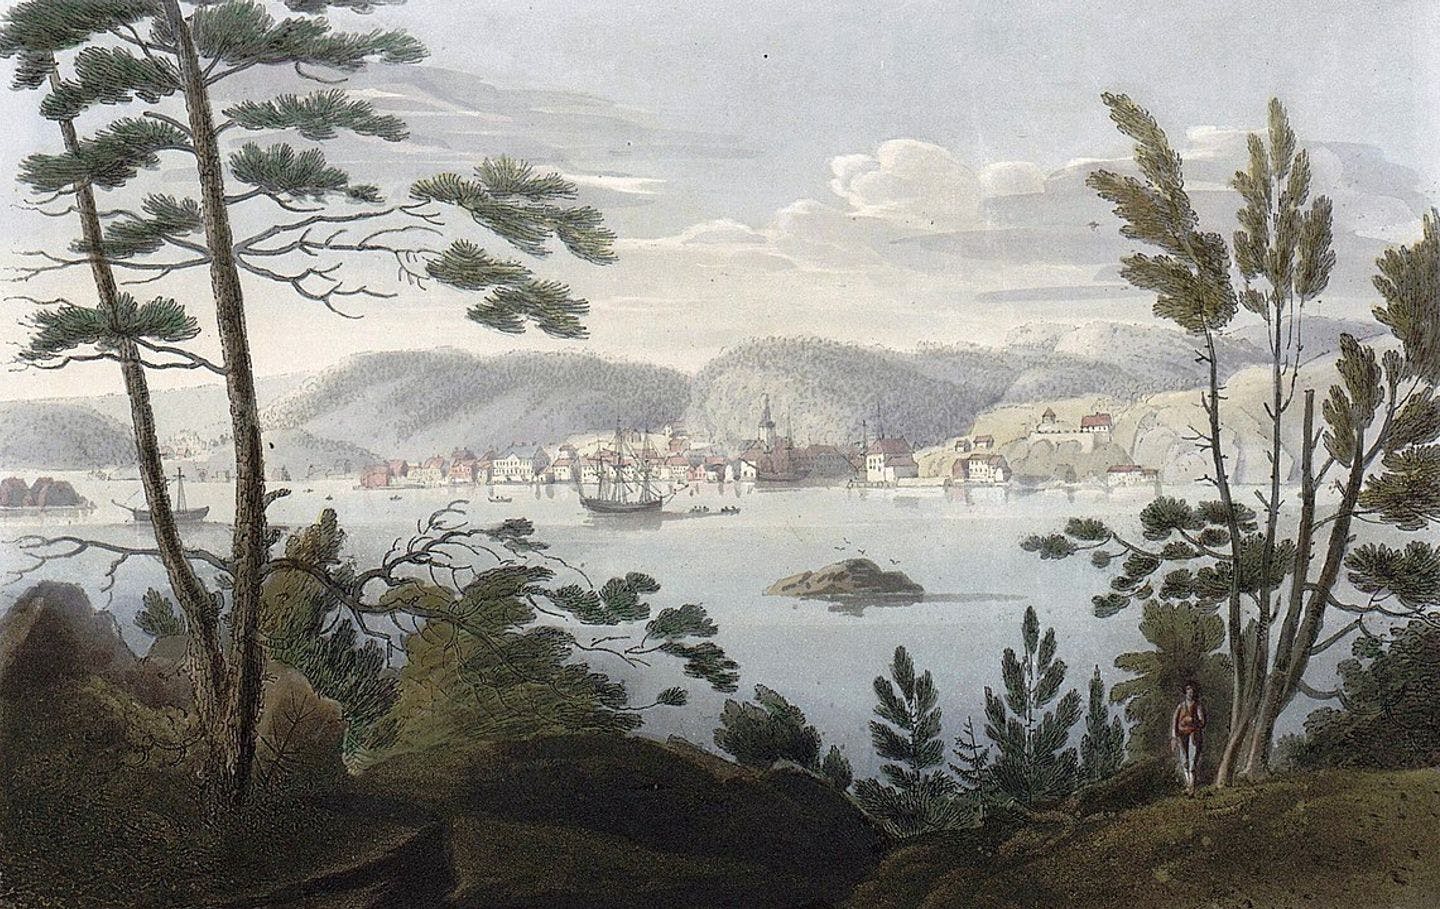 Arendal seen from Tromøya, painted by John William Edy in 1820.